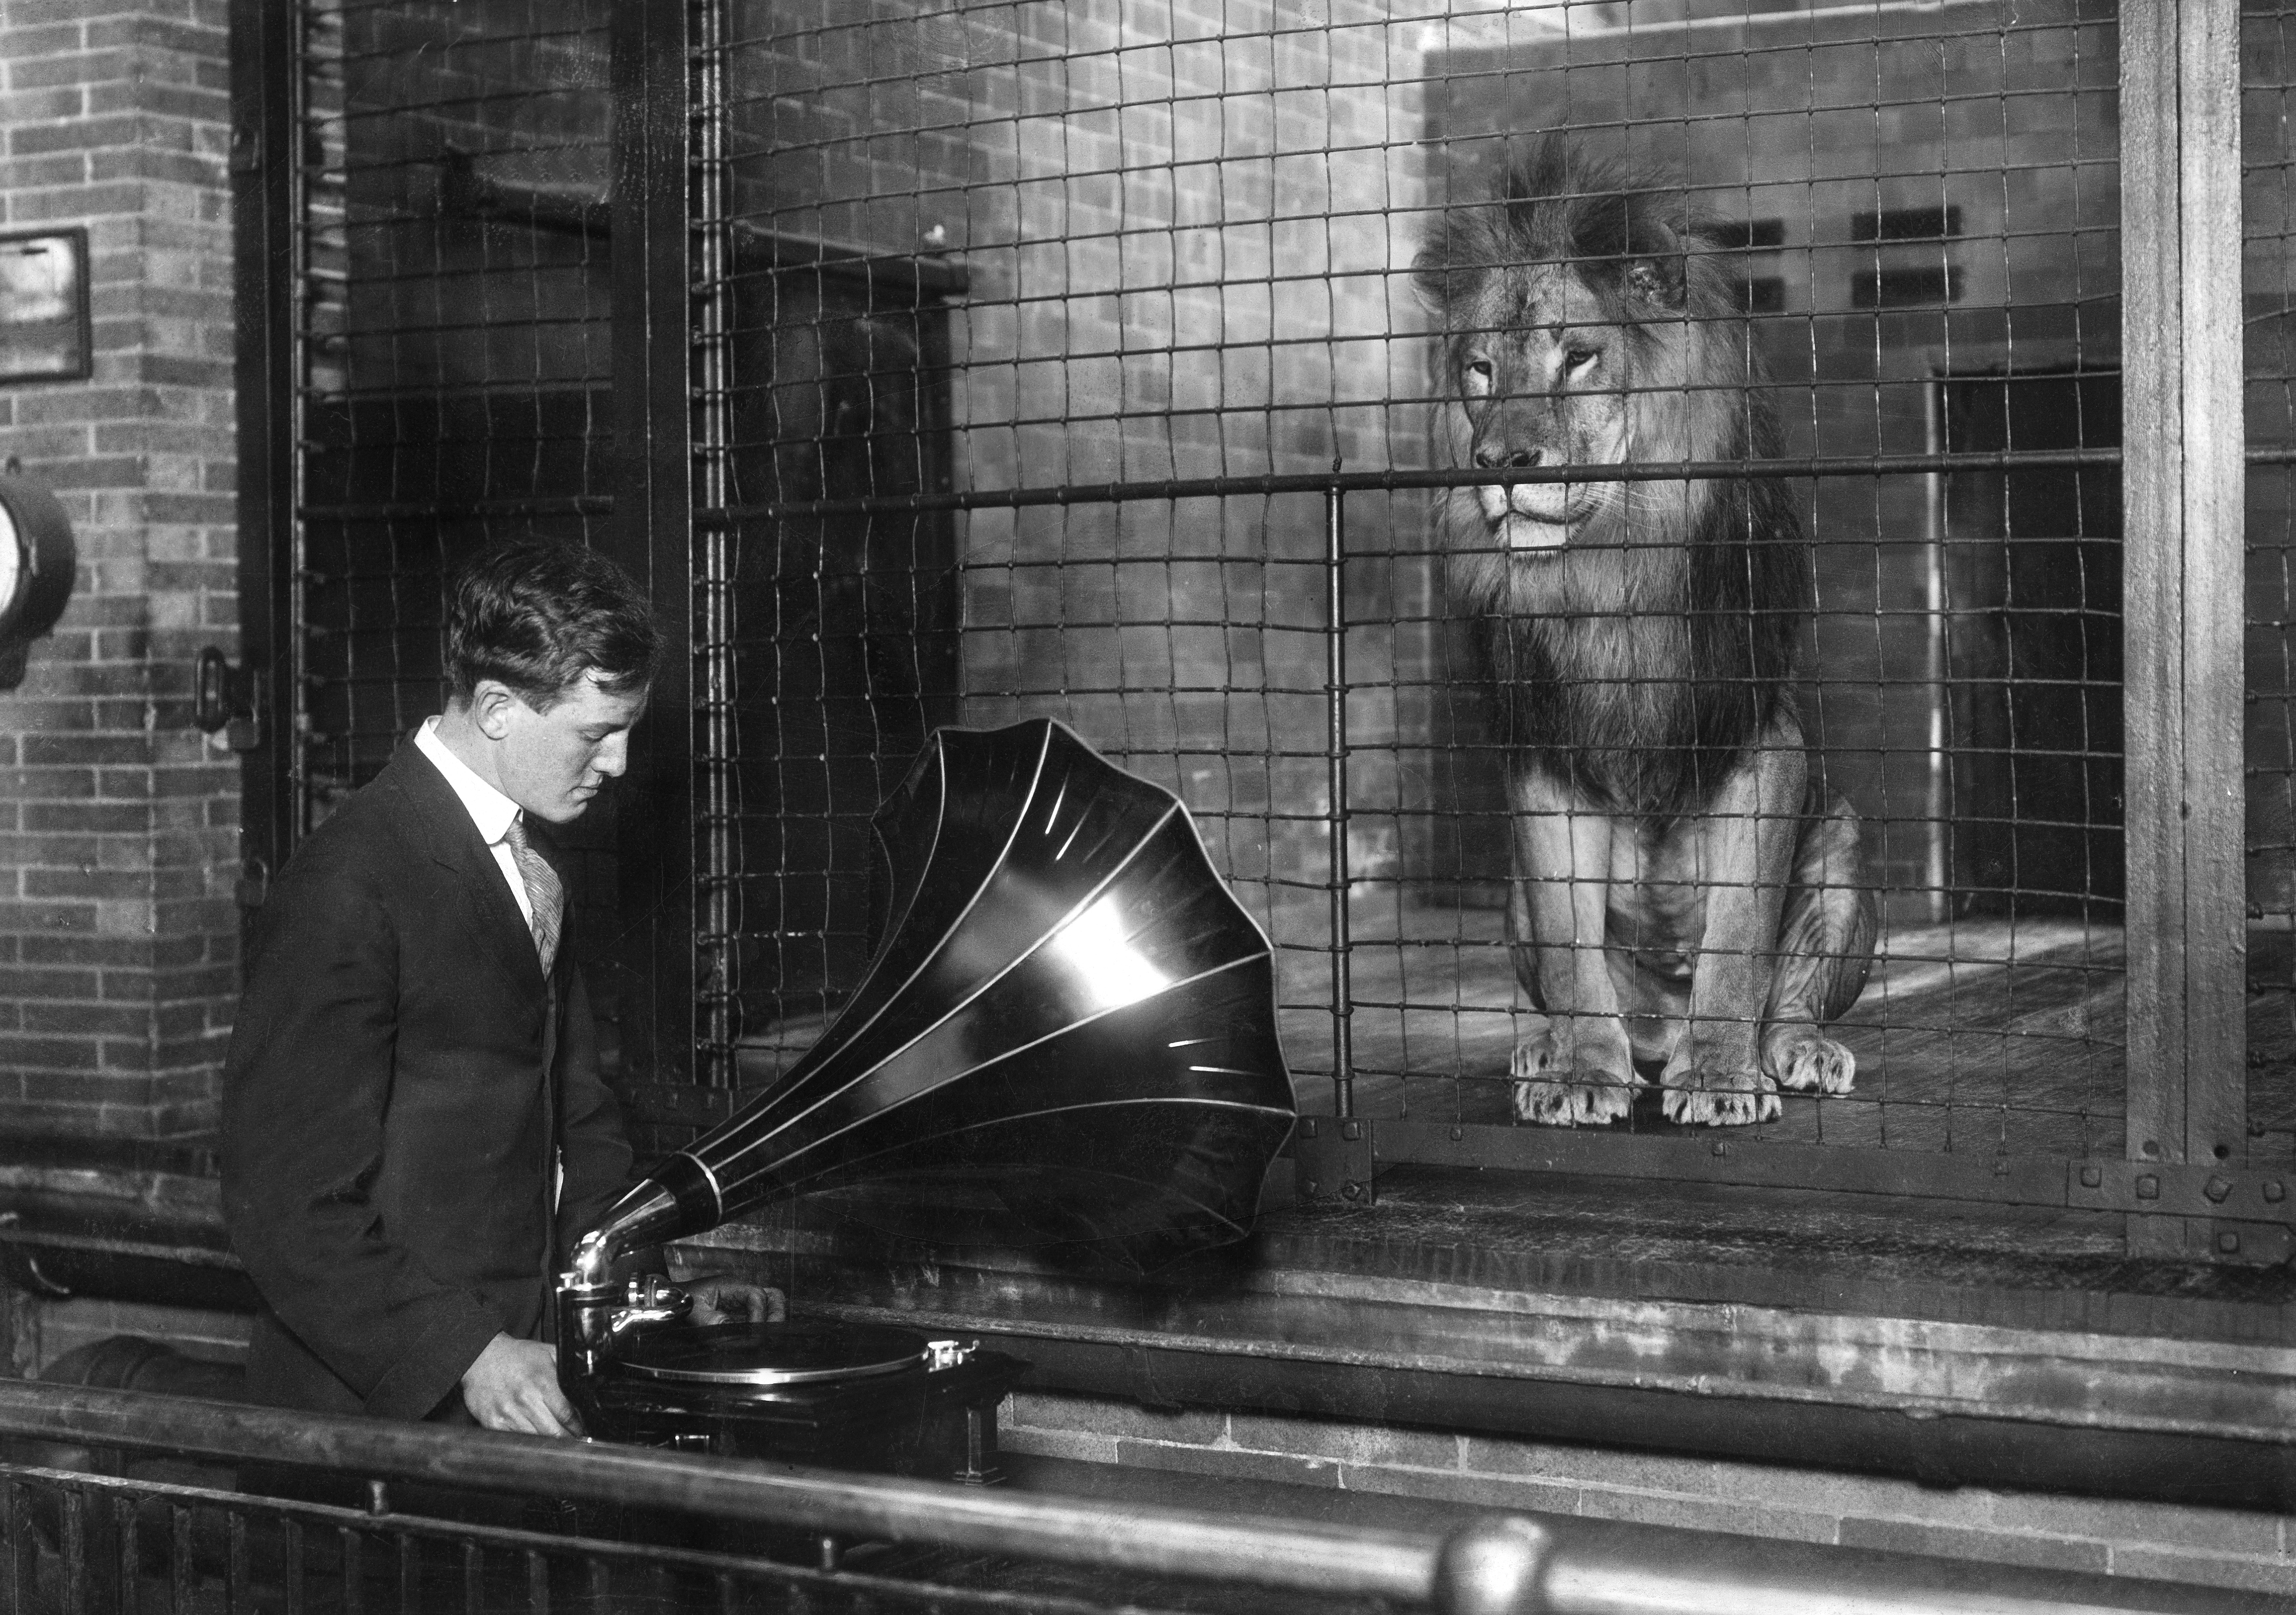 Keeper play music with a gramophone in front of a cage of a lion. - Photographer: Philipp Kester- 1909Vintage property of ullstein bild